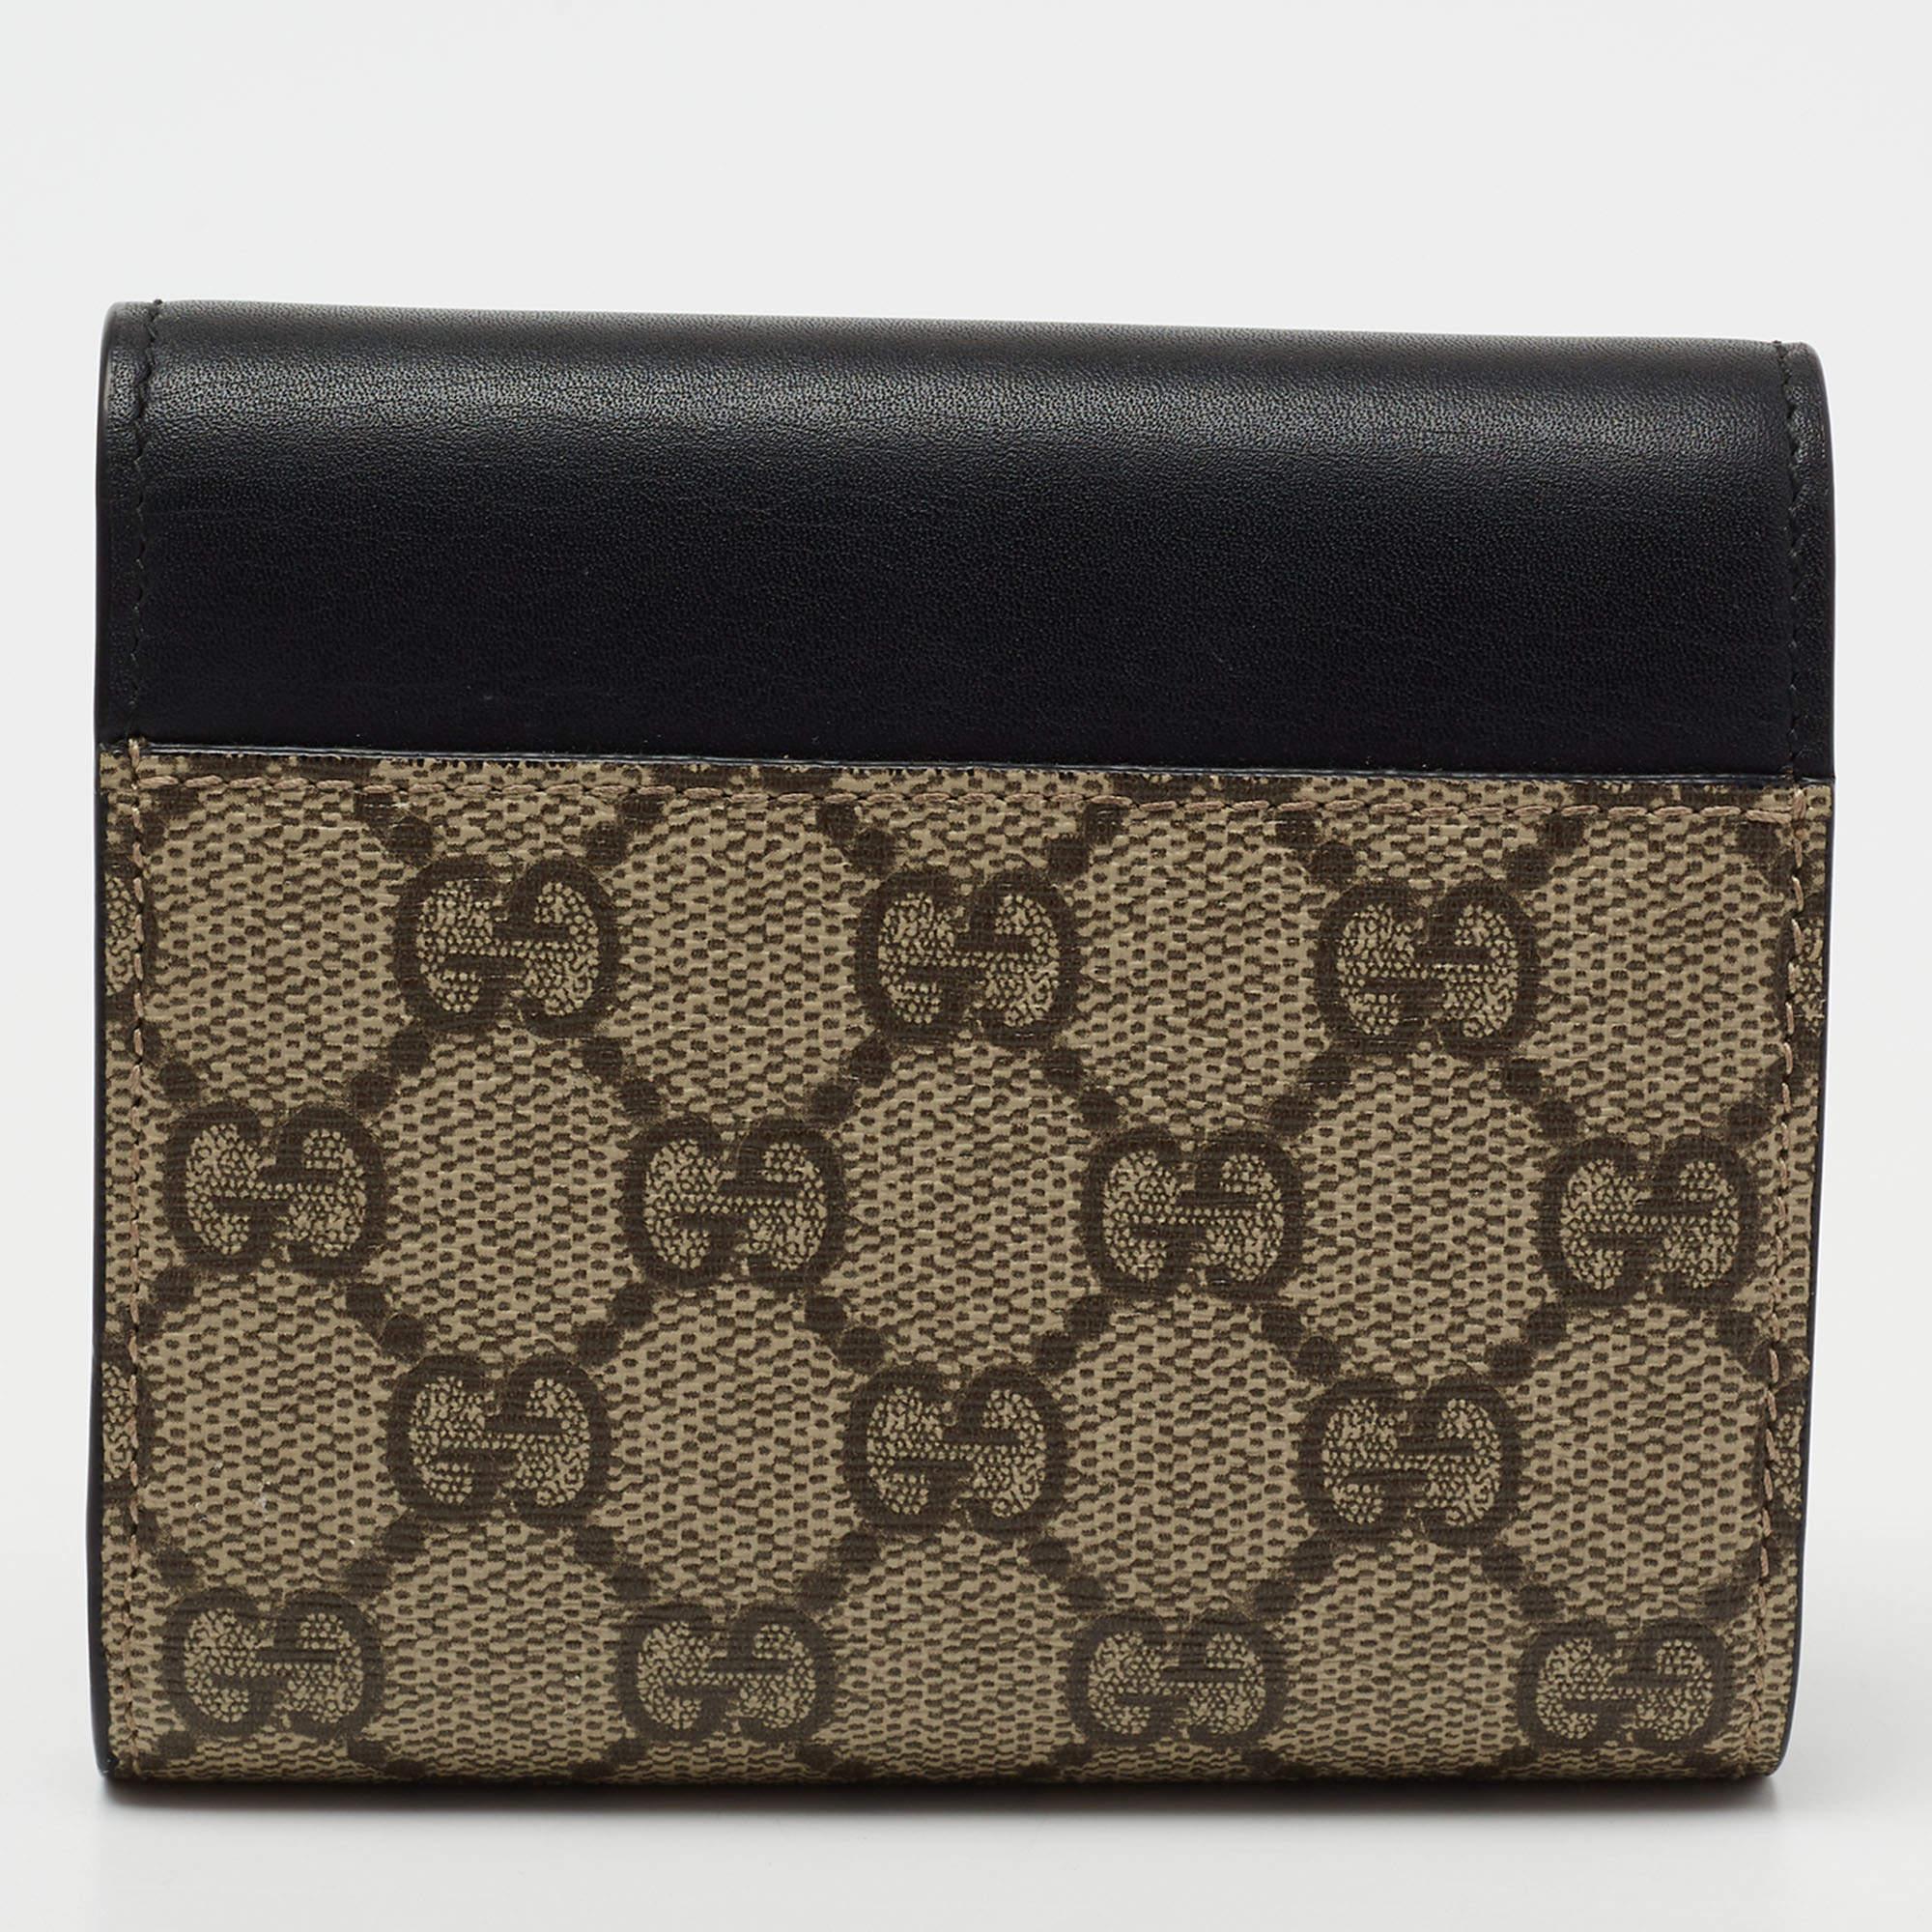 Carry your valuables in style and safety with this wallet from the House of Gucci. Created using black-beige GG Supreme canvas and leather, with a padlock closure perched on the front. It flaunts gold-tone fittings and a fabric-leather interior.